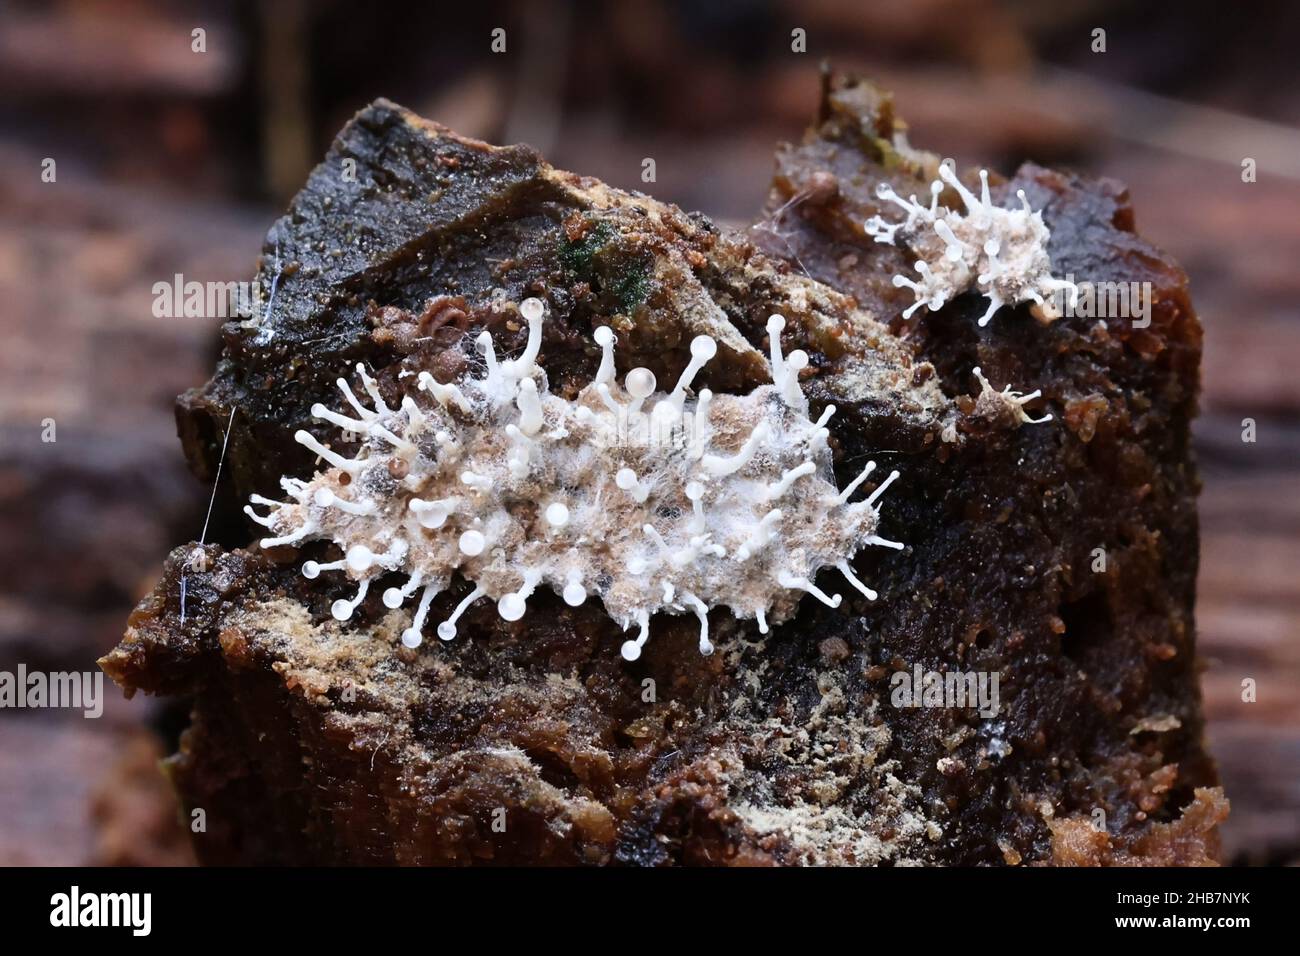 A fungus called Blistum byssiseda, parasite on host slime mold called Cribraria argillacea Stock Photo